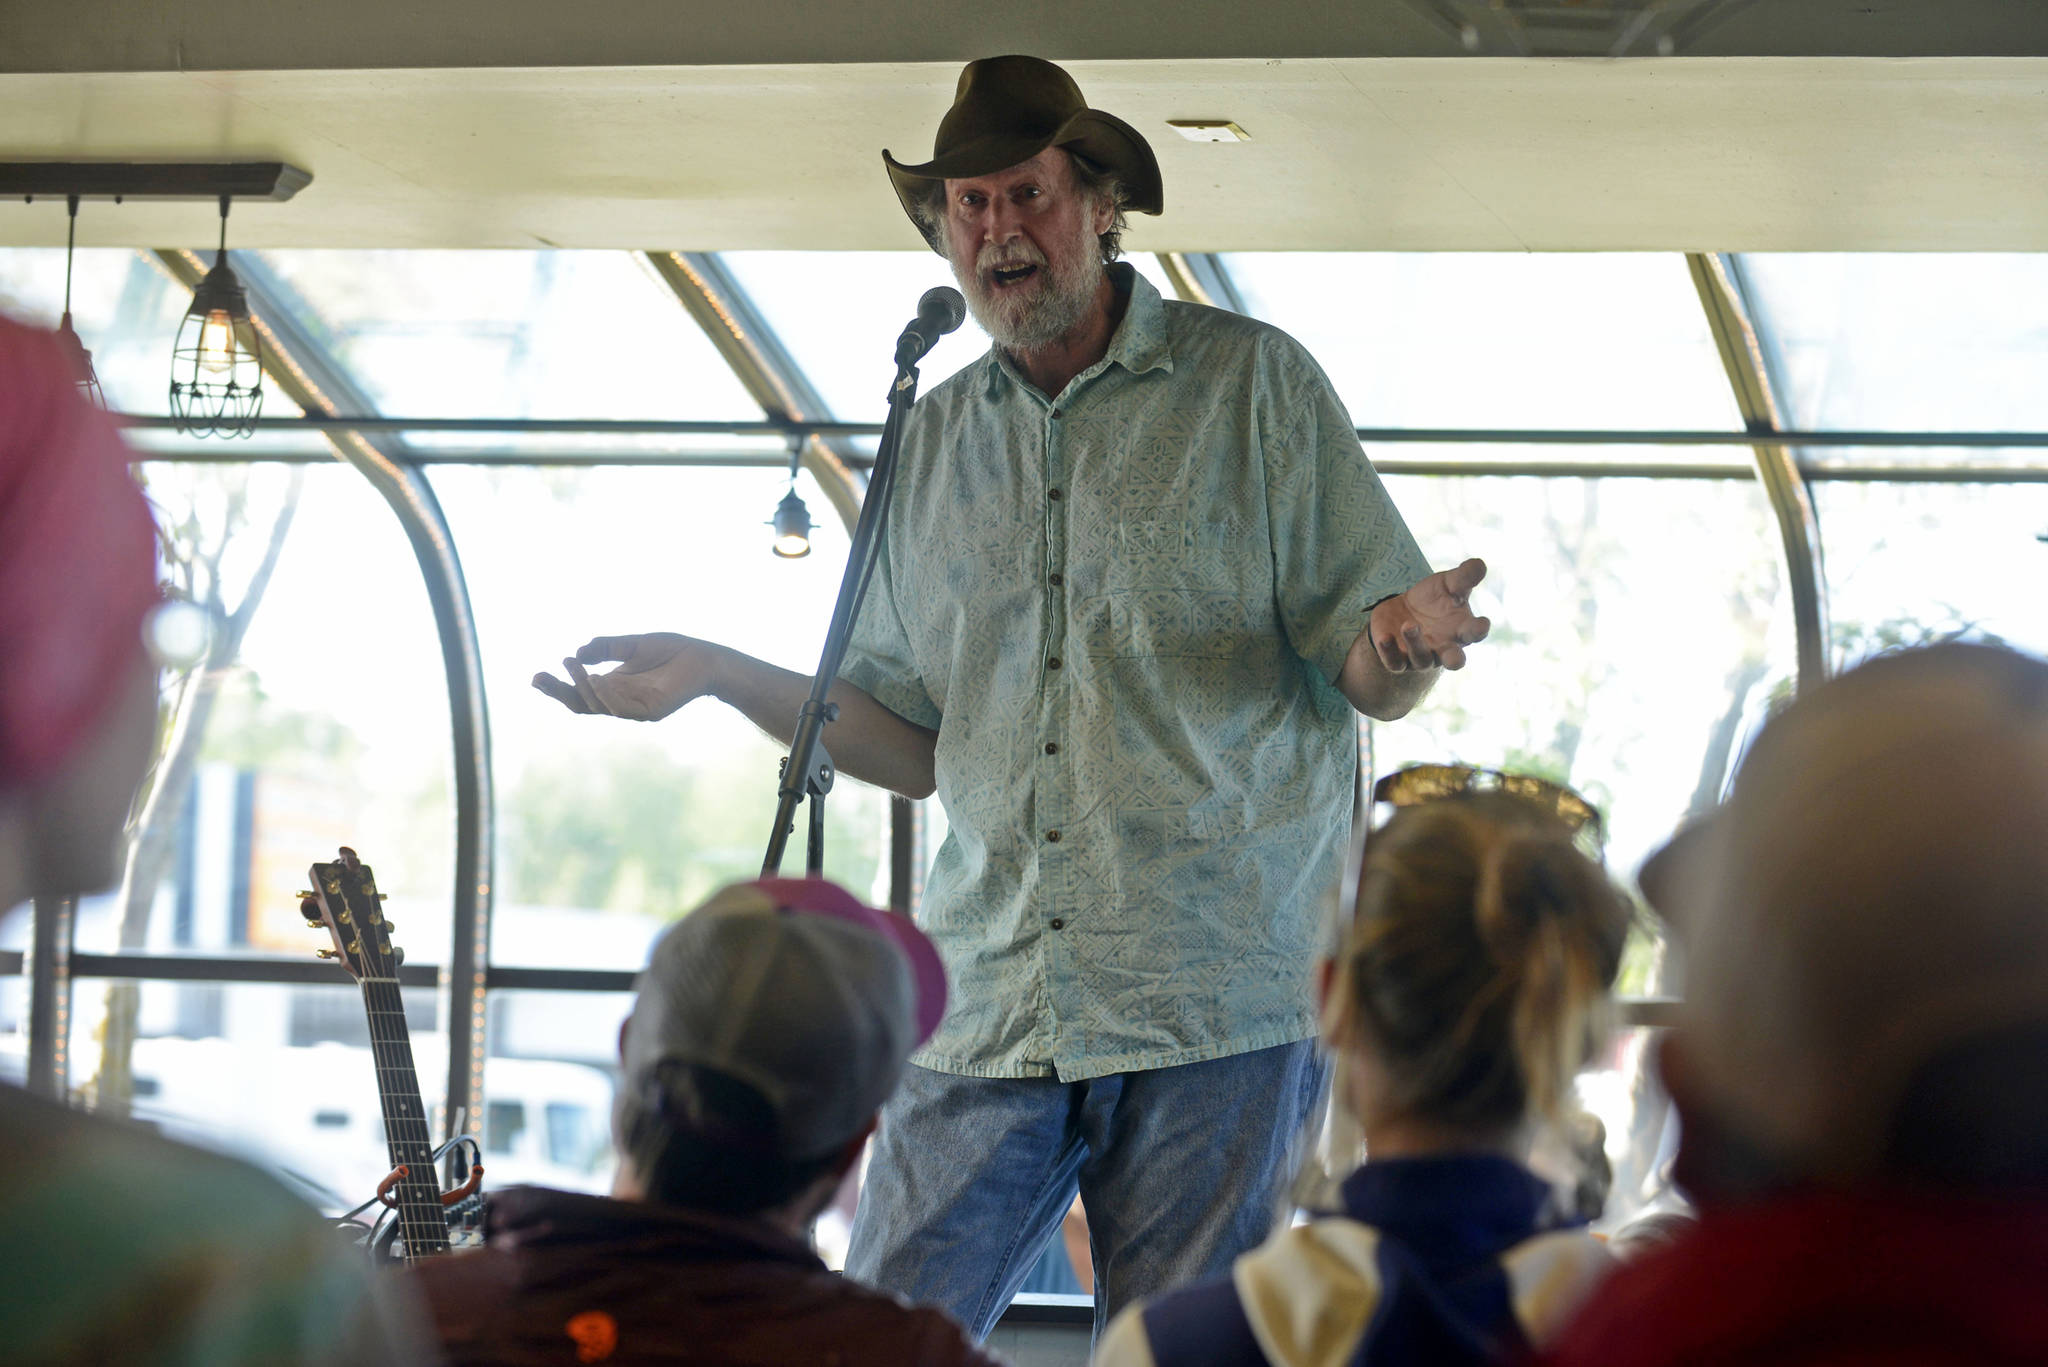 Bill Holt tells a fishing tale at Odie’s Deli on Friday, June 2, 2017 in Soldotna, Alaska. Holt was among the seven storytellers in the latest session of True Tales Told Live, an ocassional storytelling event cofounded by Pegge Erkeneff, Jenny Nyman, and Kaitlin Vadla. (Ben Boettger/Peninsula Clarion)